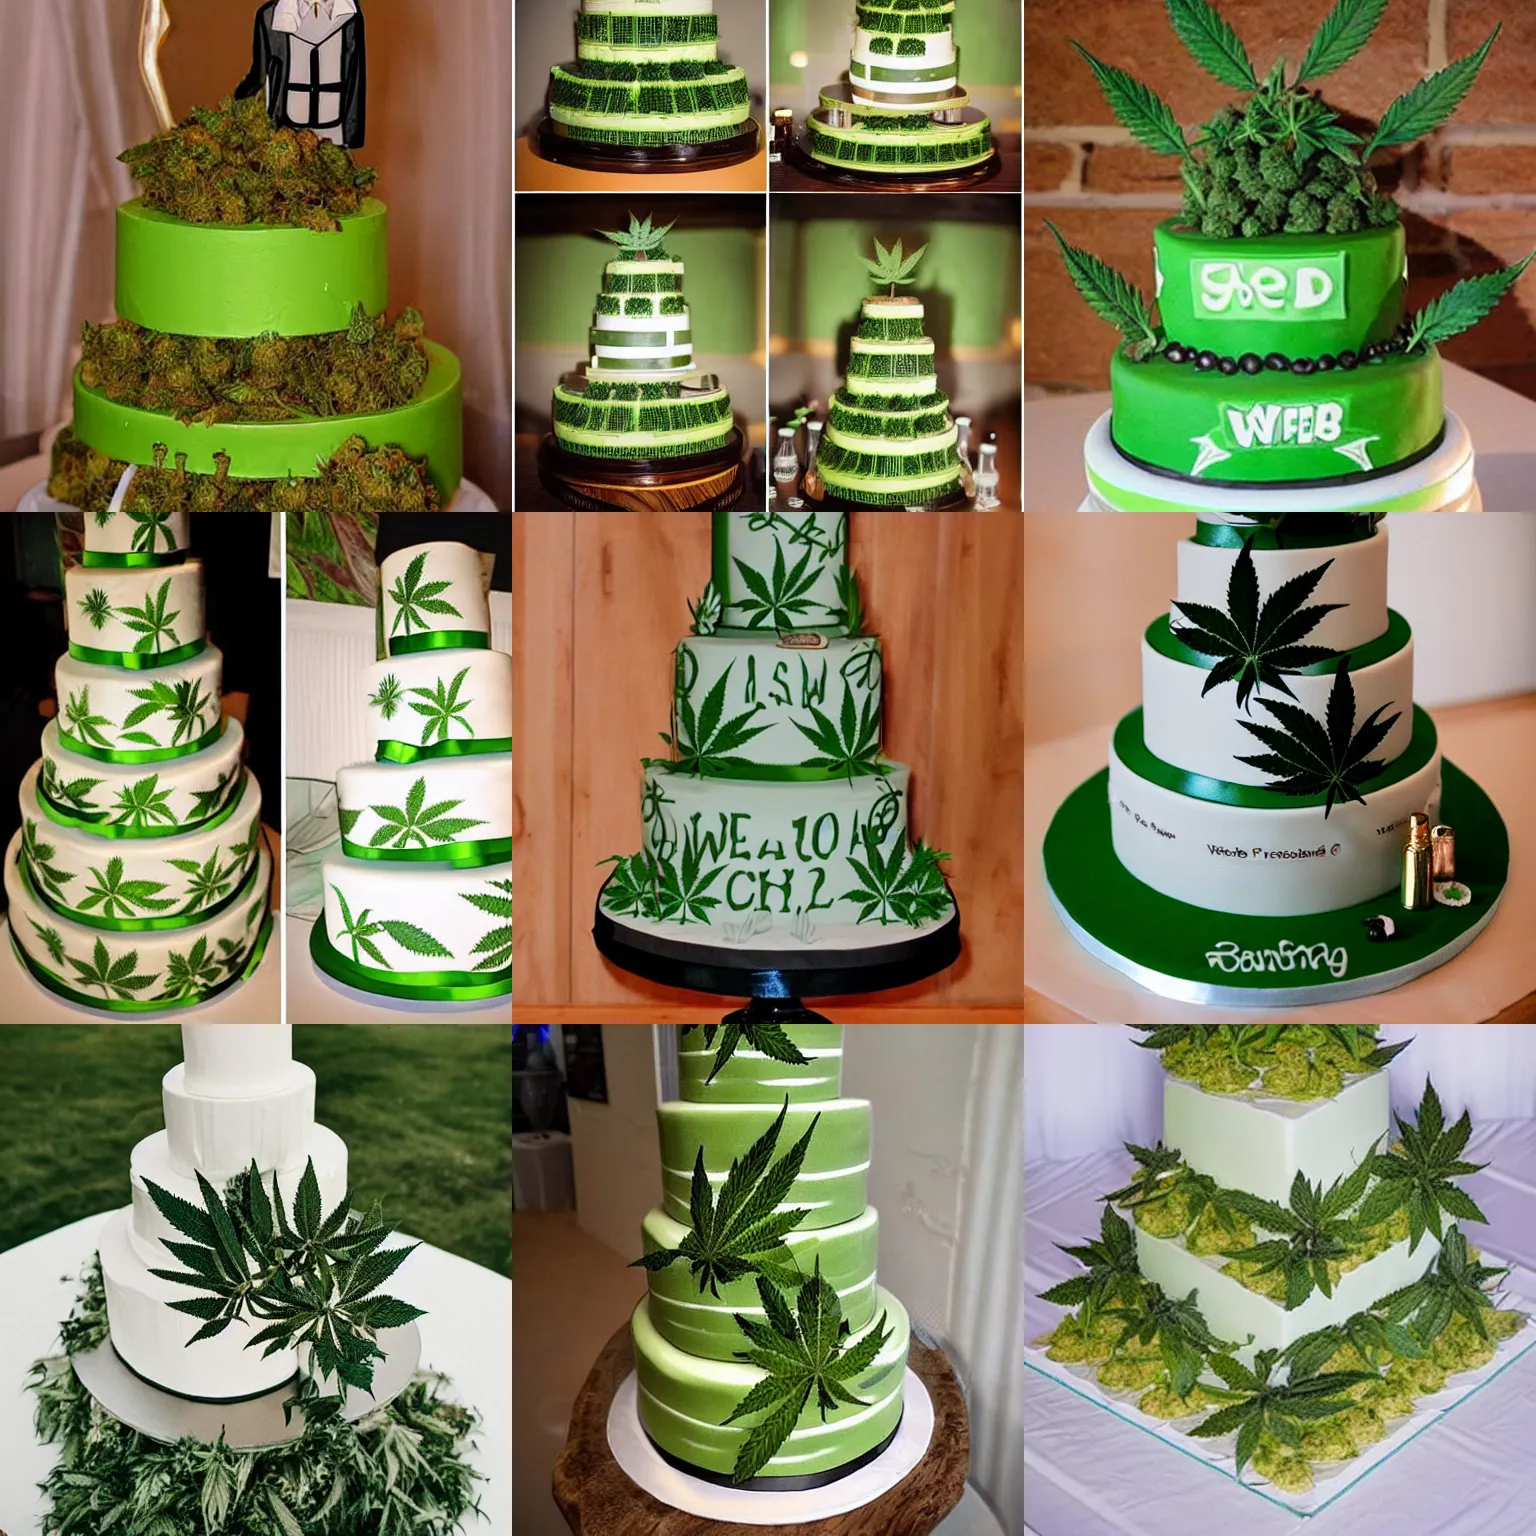 The baker creating sumptuous weed cakes to banish stoner stereotypes | Dazed